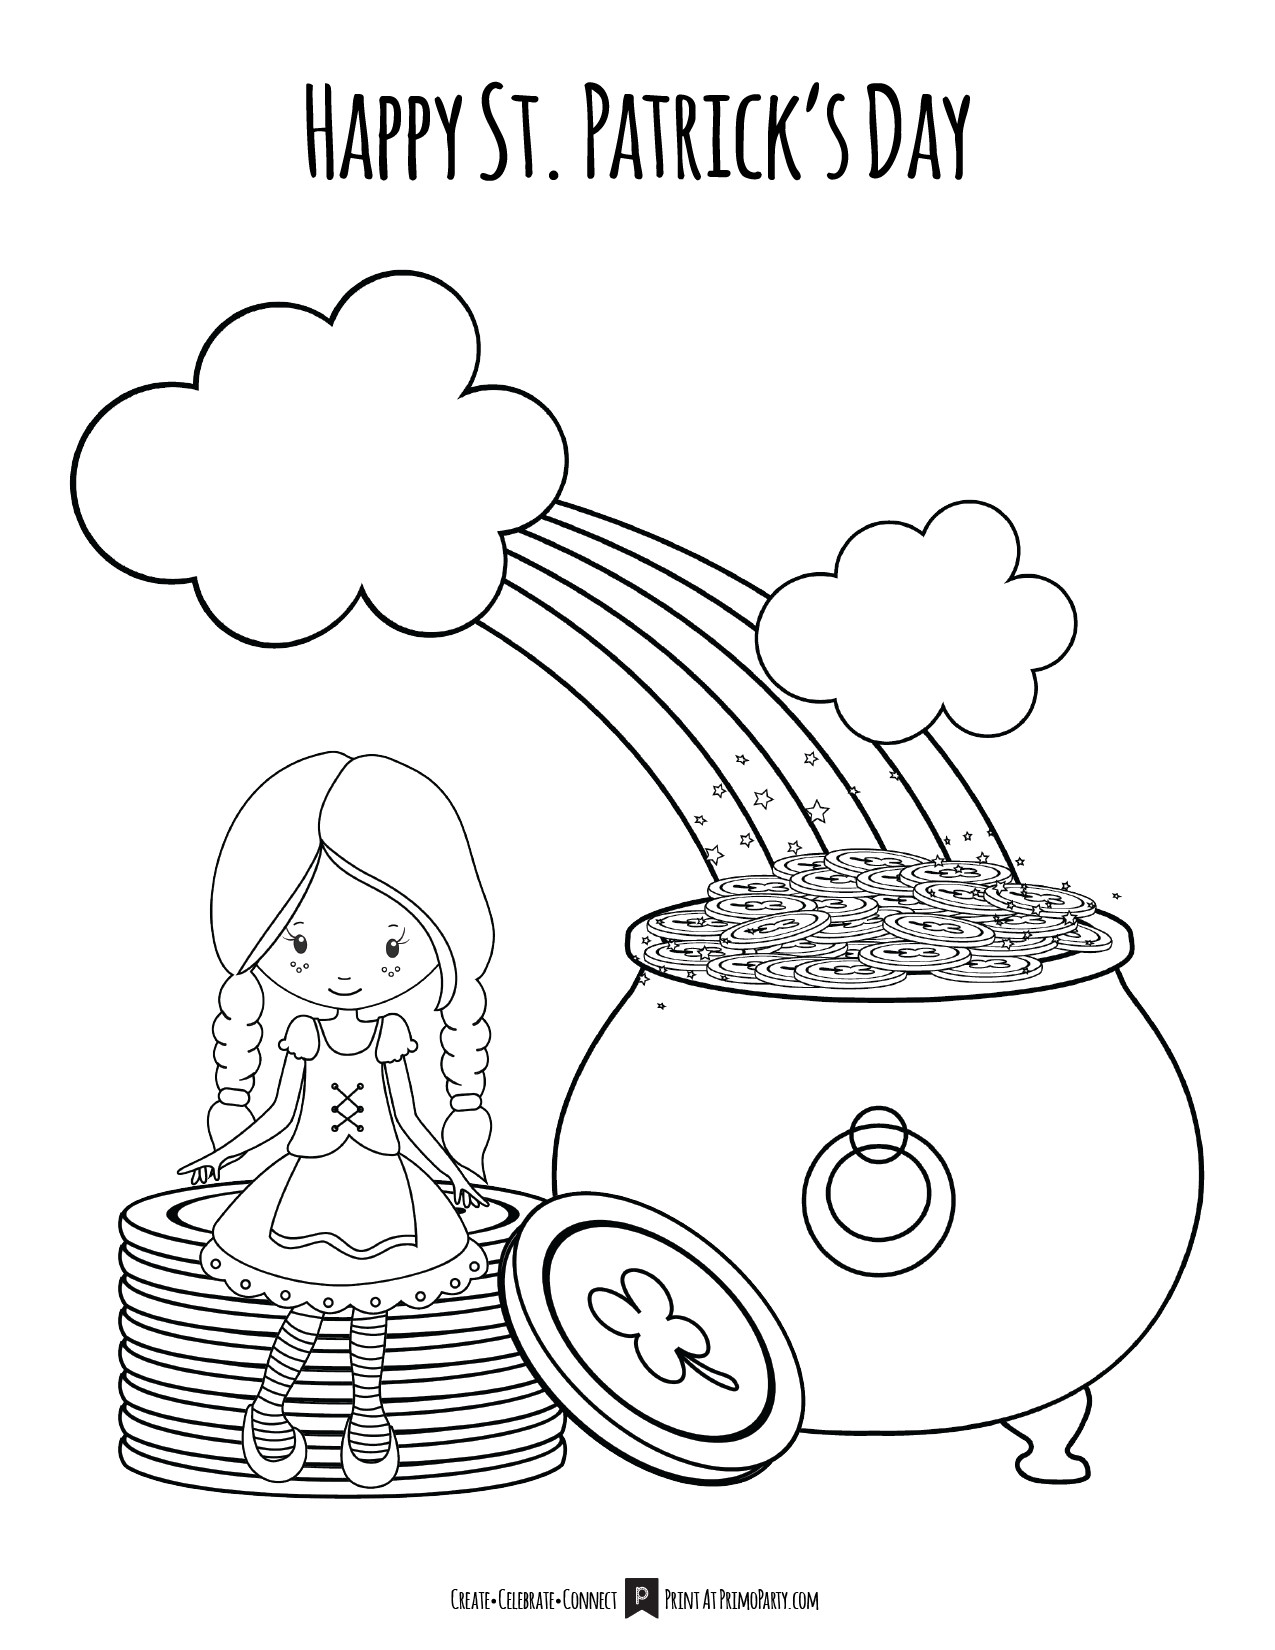 St Patrick'S Day Disney Coloring Sheets For Girls
 Lucky Girl St Patrick’s Day Coloring Page ⋆ Primoparty